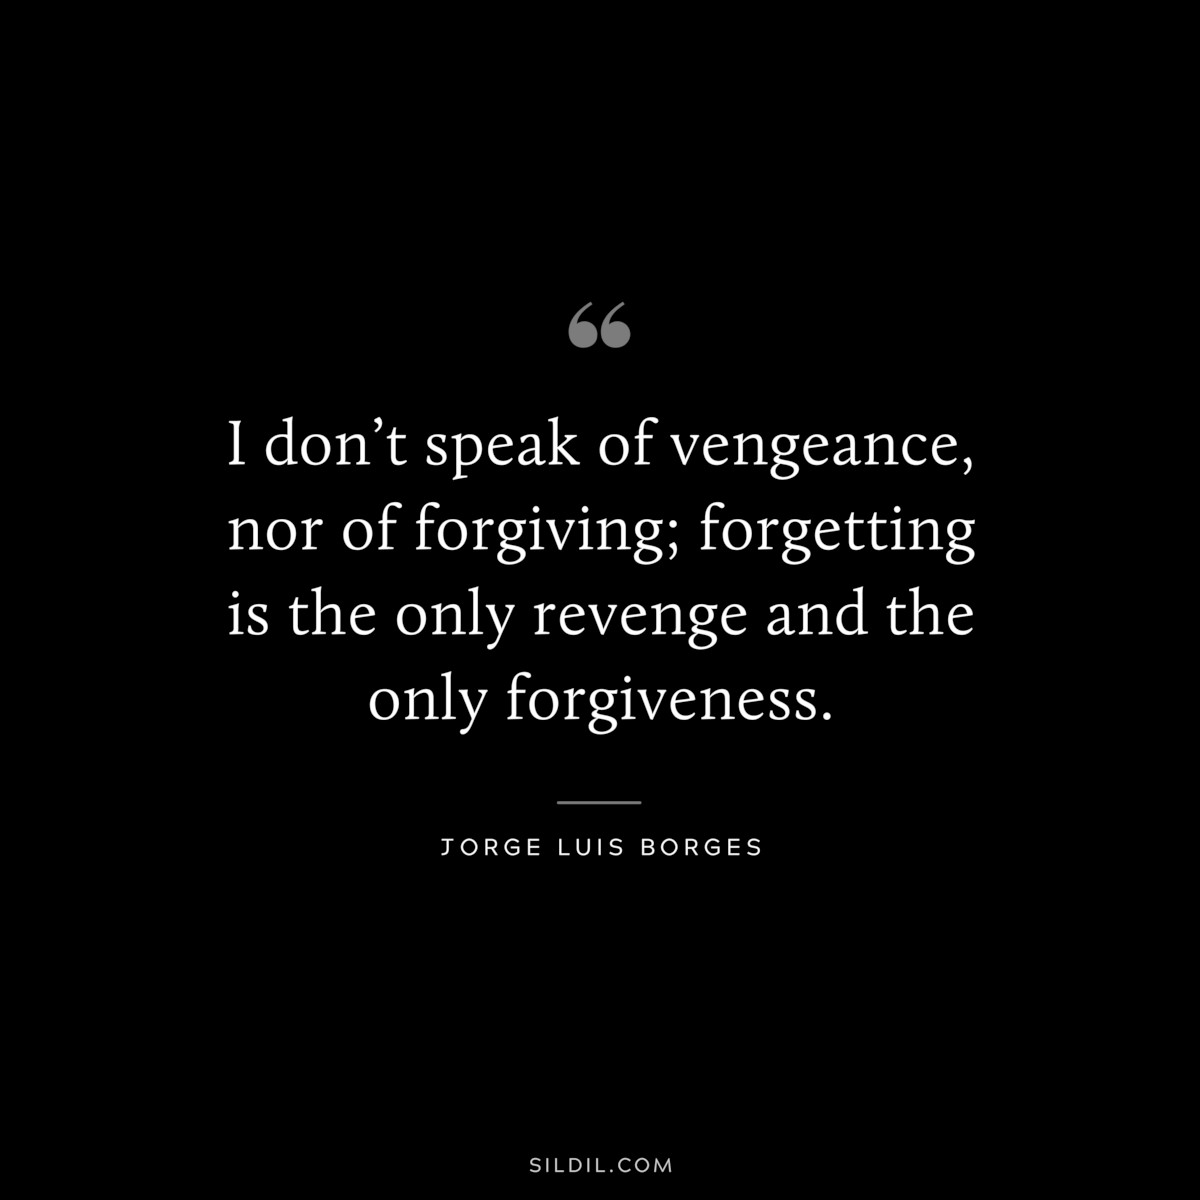 I don’t speak of vengeance, nor of forgiving; forgetting is the only revenge and the only forgiveness. ― Jorge Luis Borges